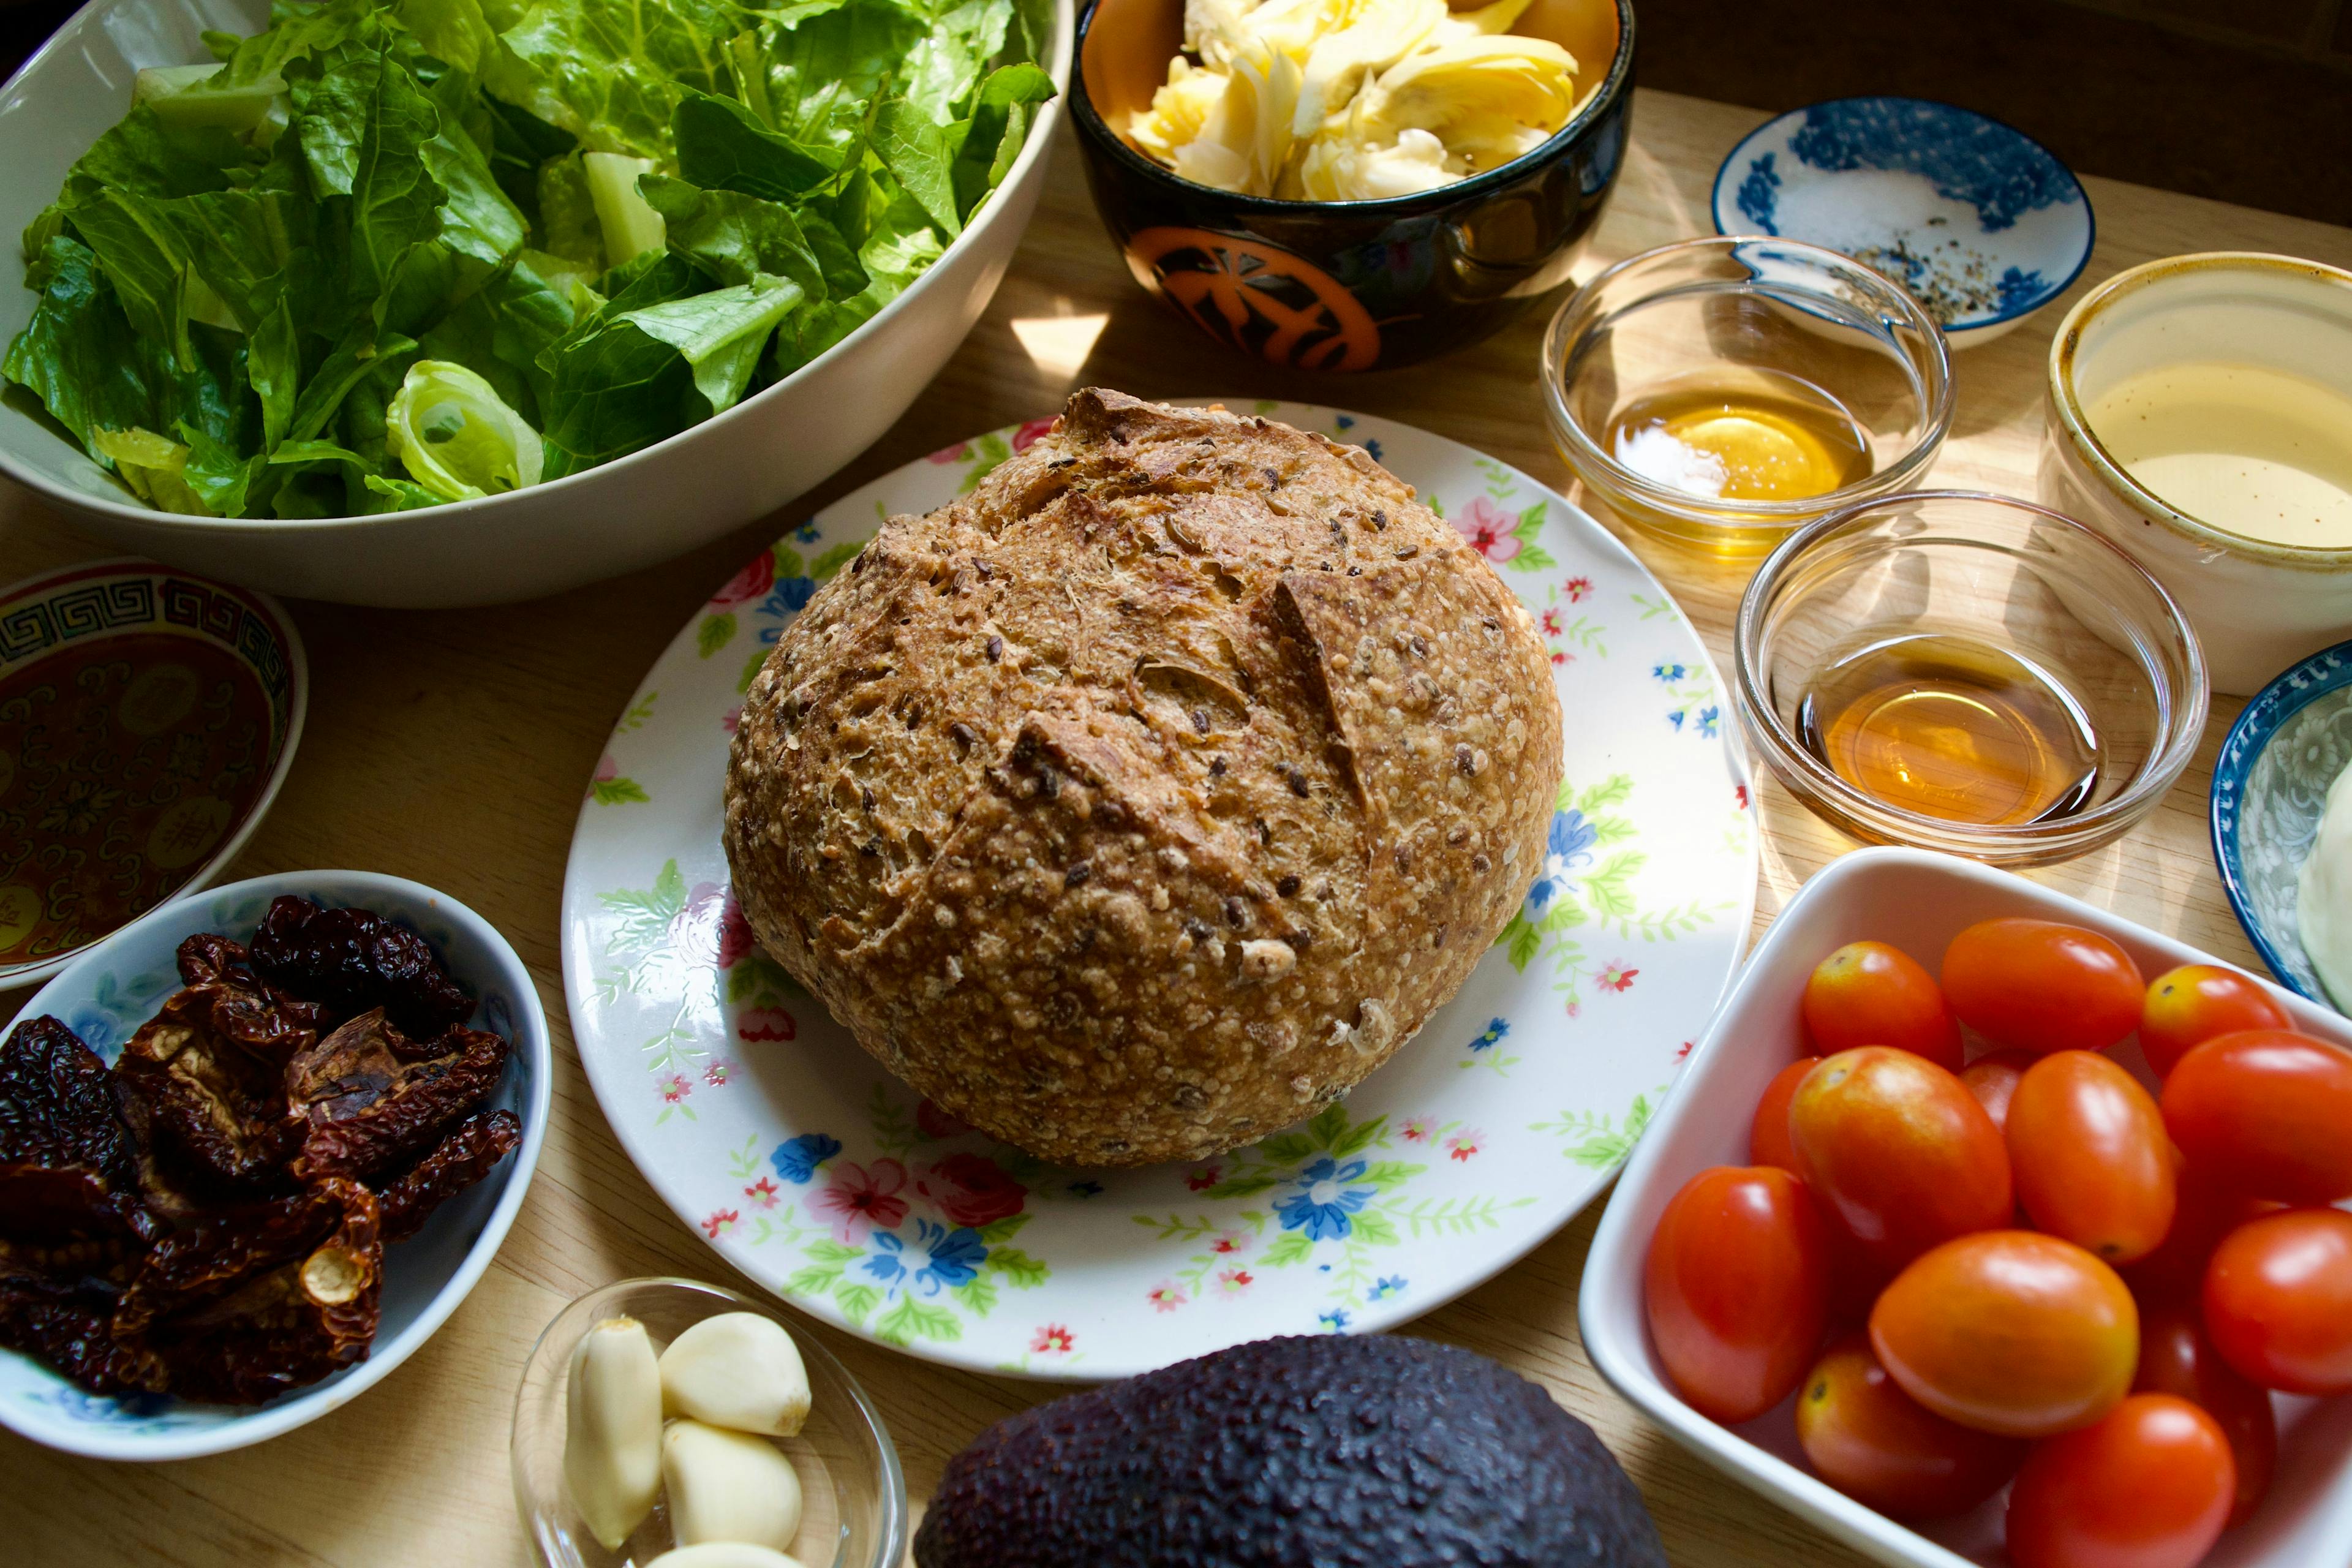 Ingredients in bowls - romaine, cherry tomatoes, garlic cloves, artichoke heart, sesame oil, sun dried tomatoes, and there is a small loaf of sourdough at the center.